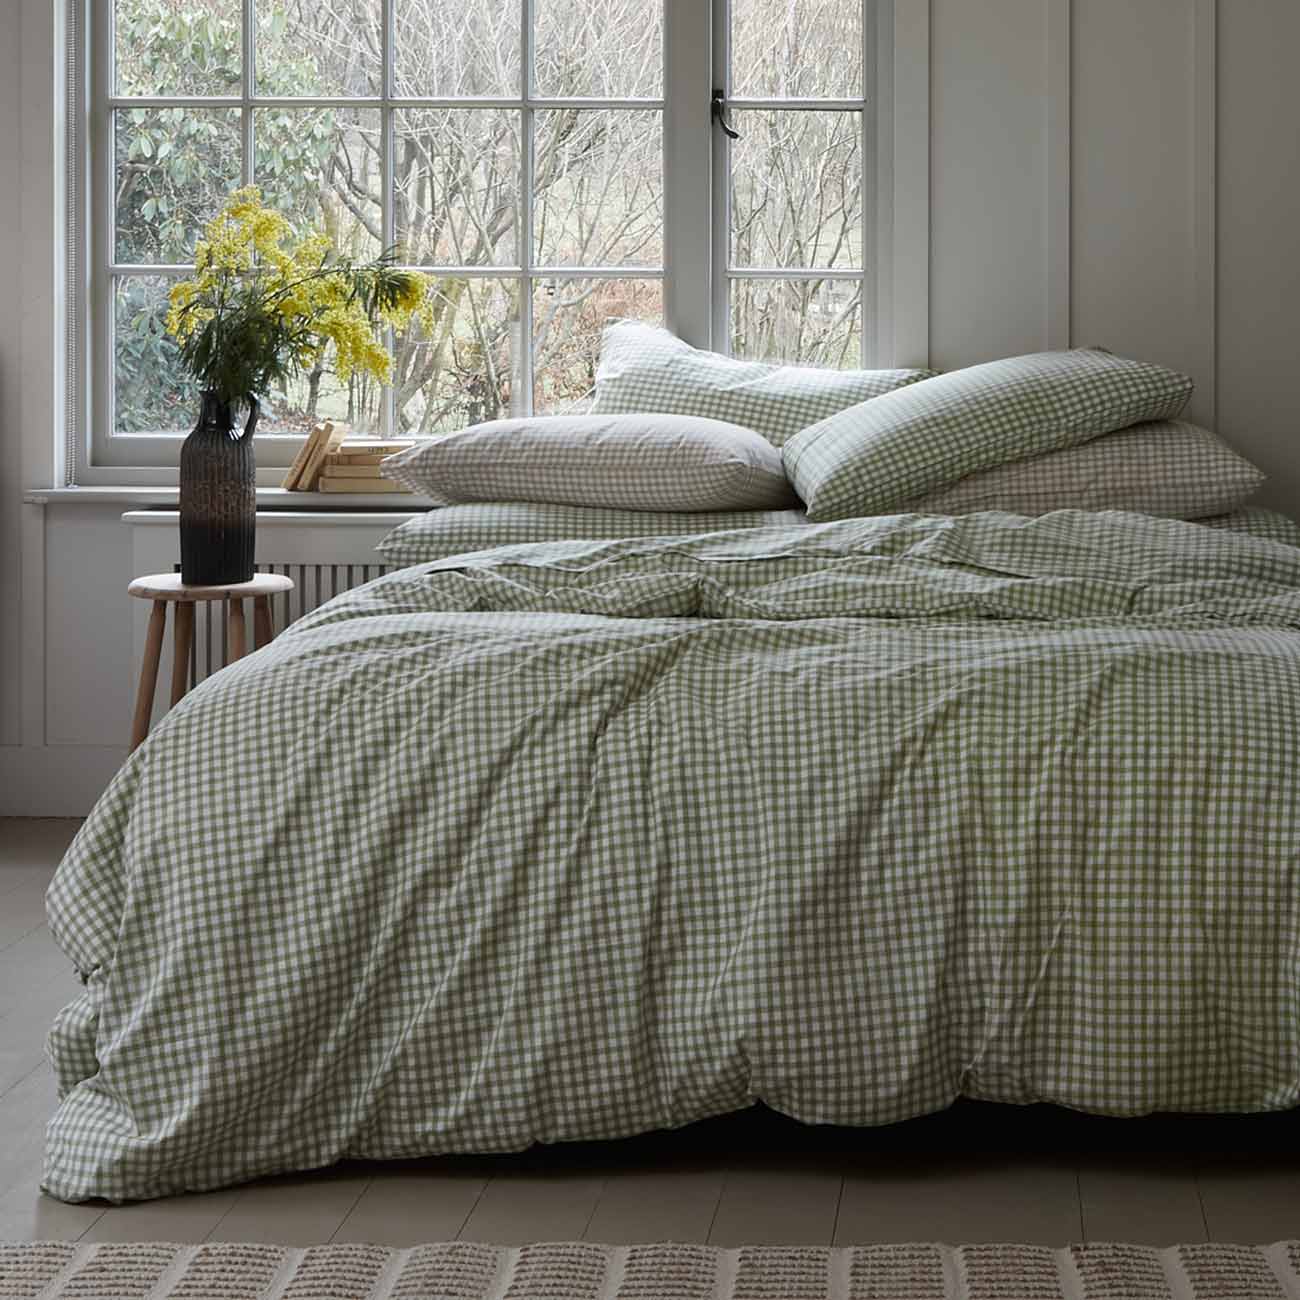 Pear Small Gingham and Cafe au Lait Small Gingham Cotton Bedding